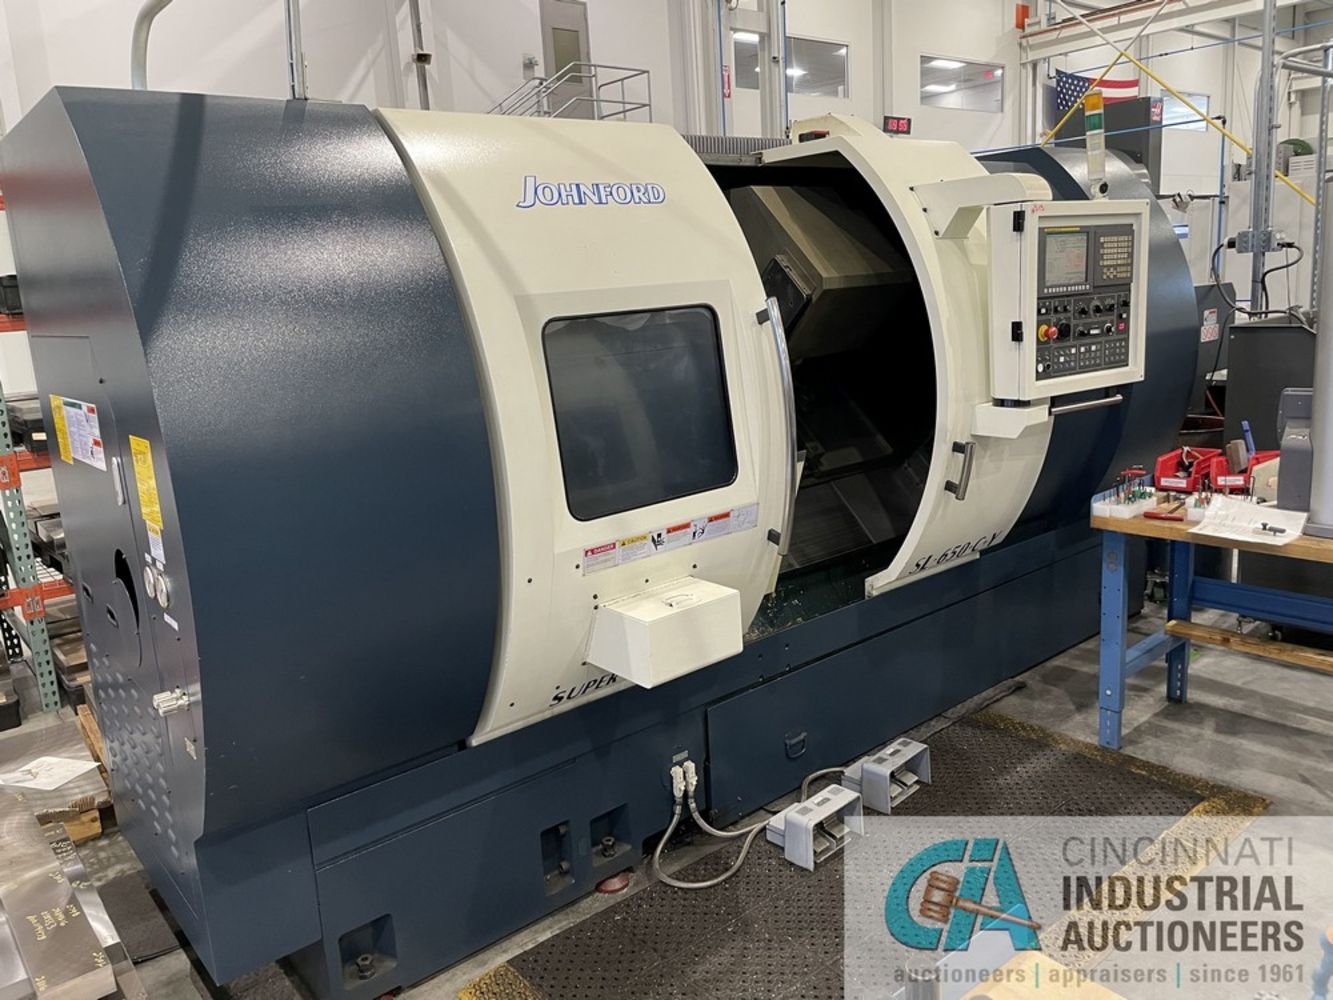 (4) Johnford SL650CY CNC Turning Centers w/ Live Tooling (2013)